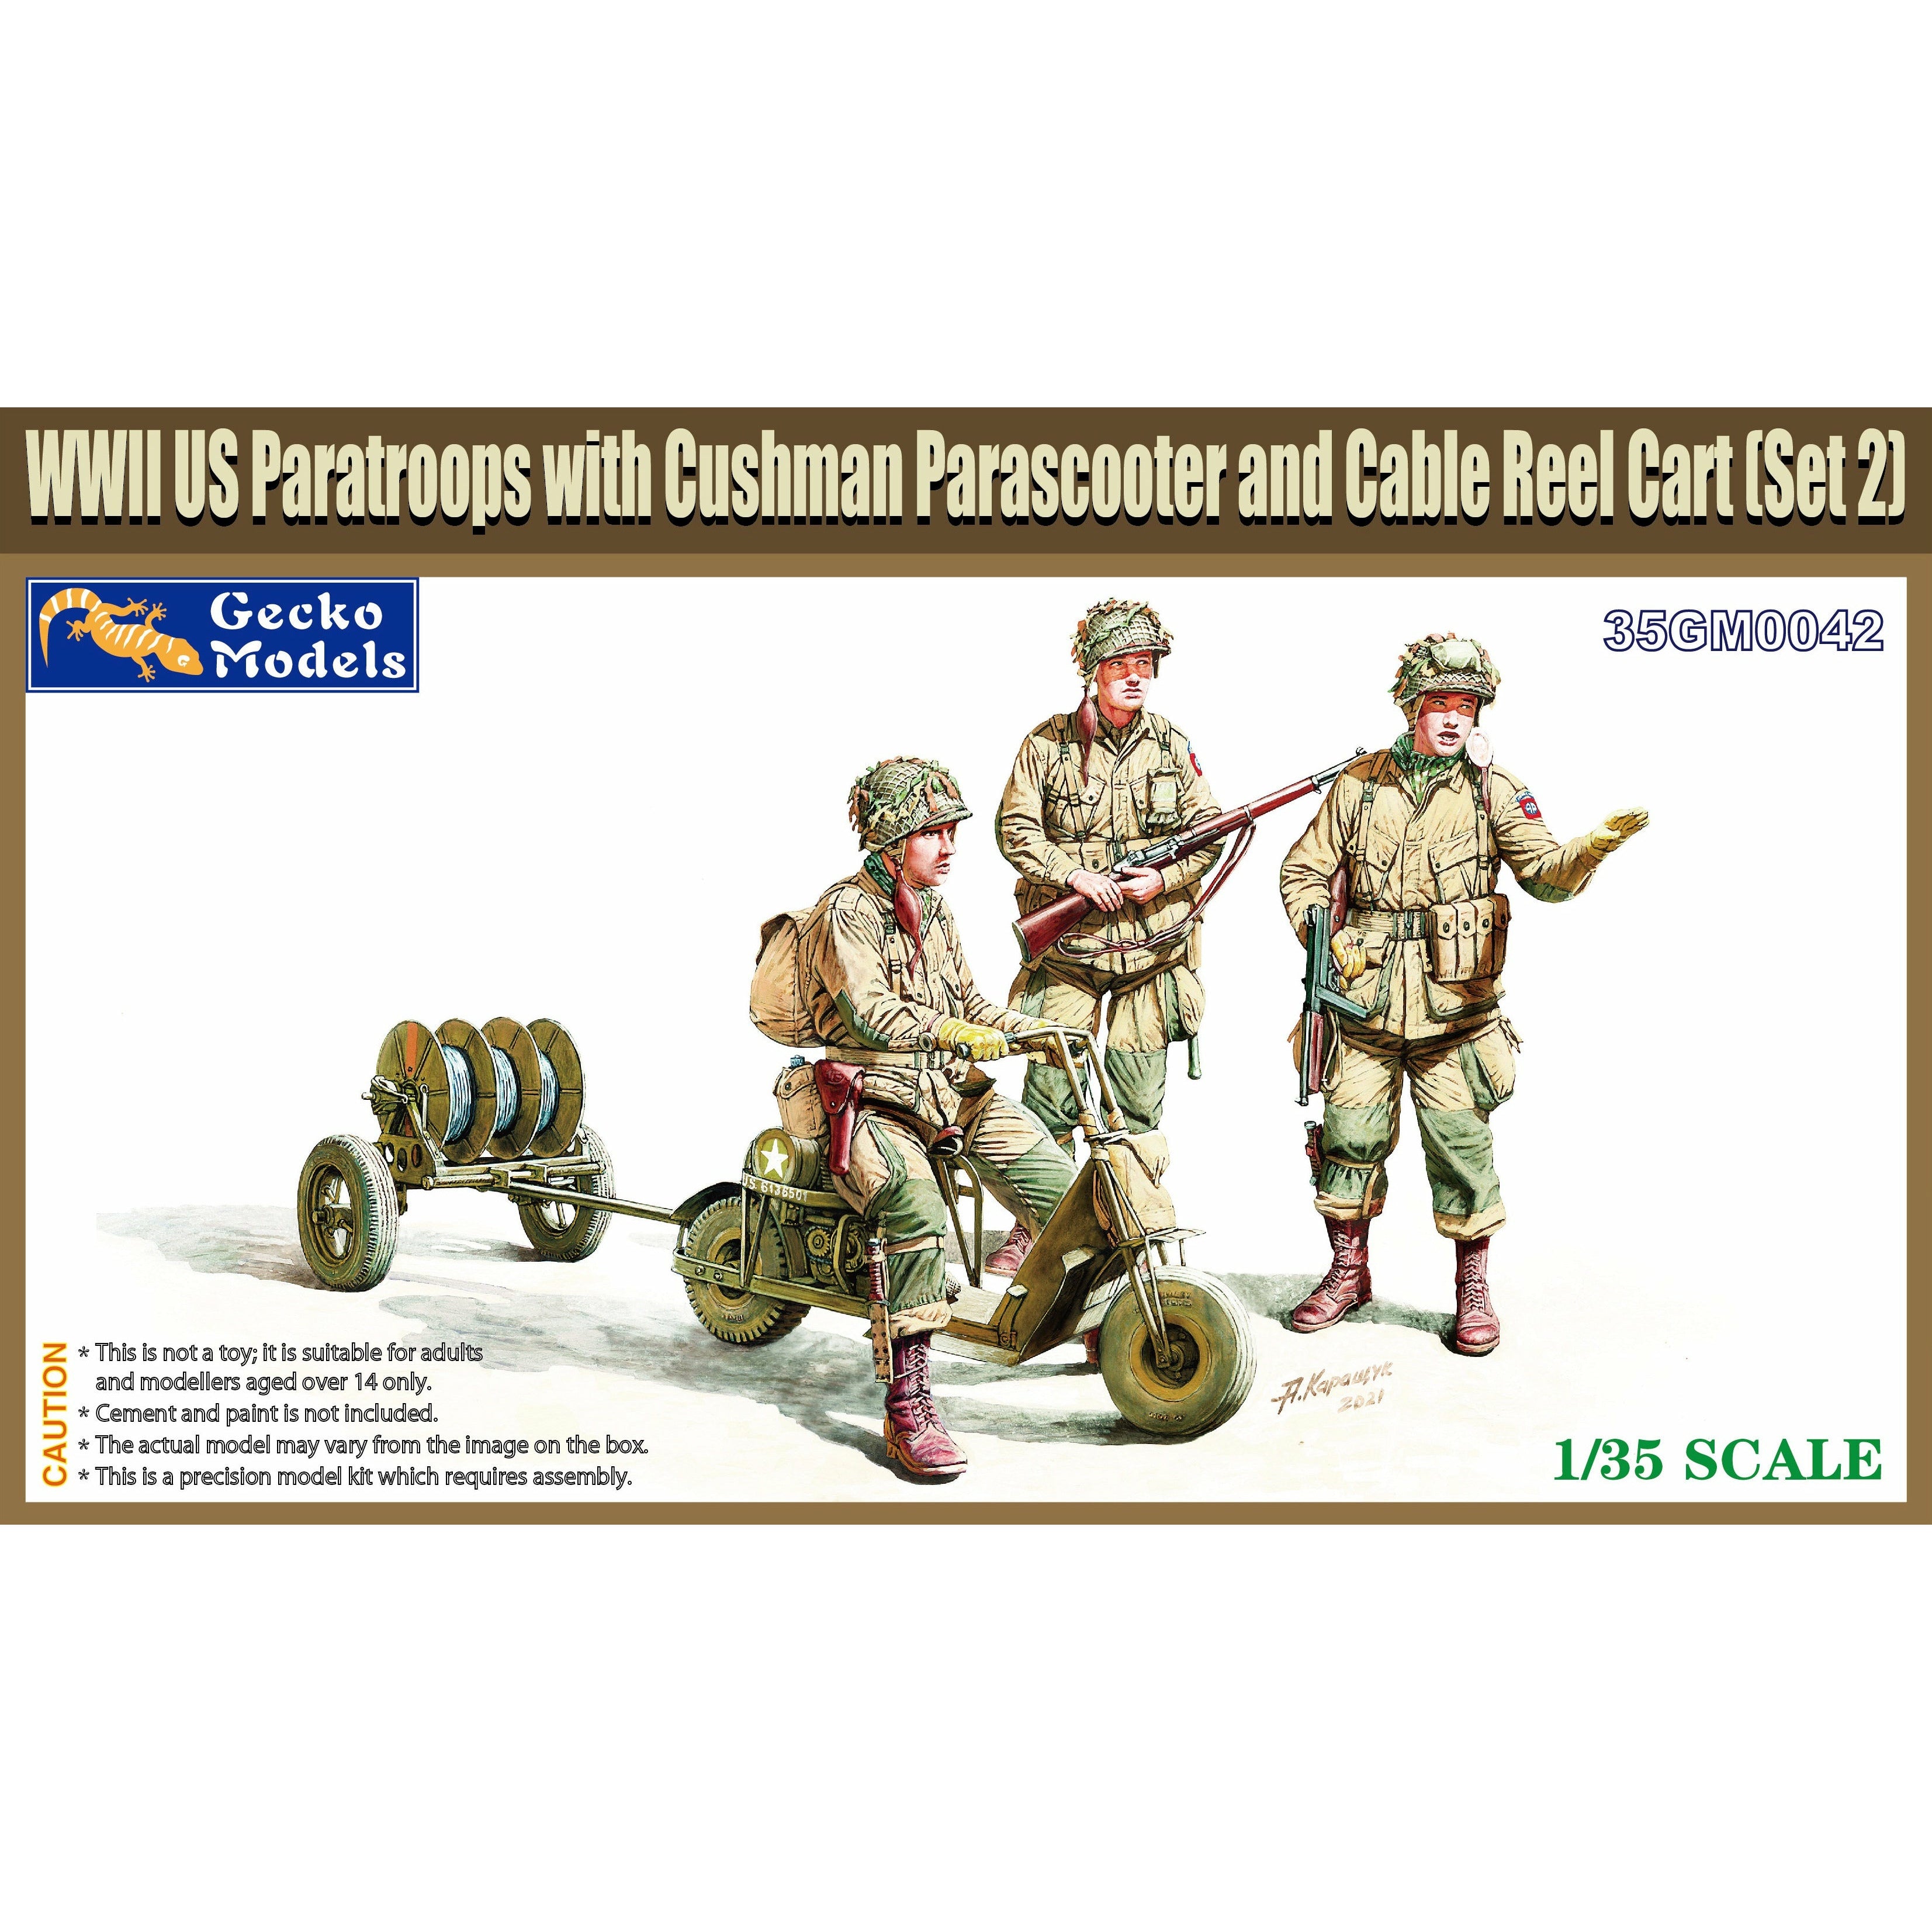 M53 Scooter Cushman w-RL-35 Cable Reel Cart Mod.1944 & US Paratroops. (Set 2) 1/35 #35GM0042 by Gecko Models